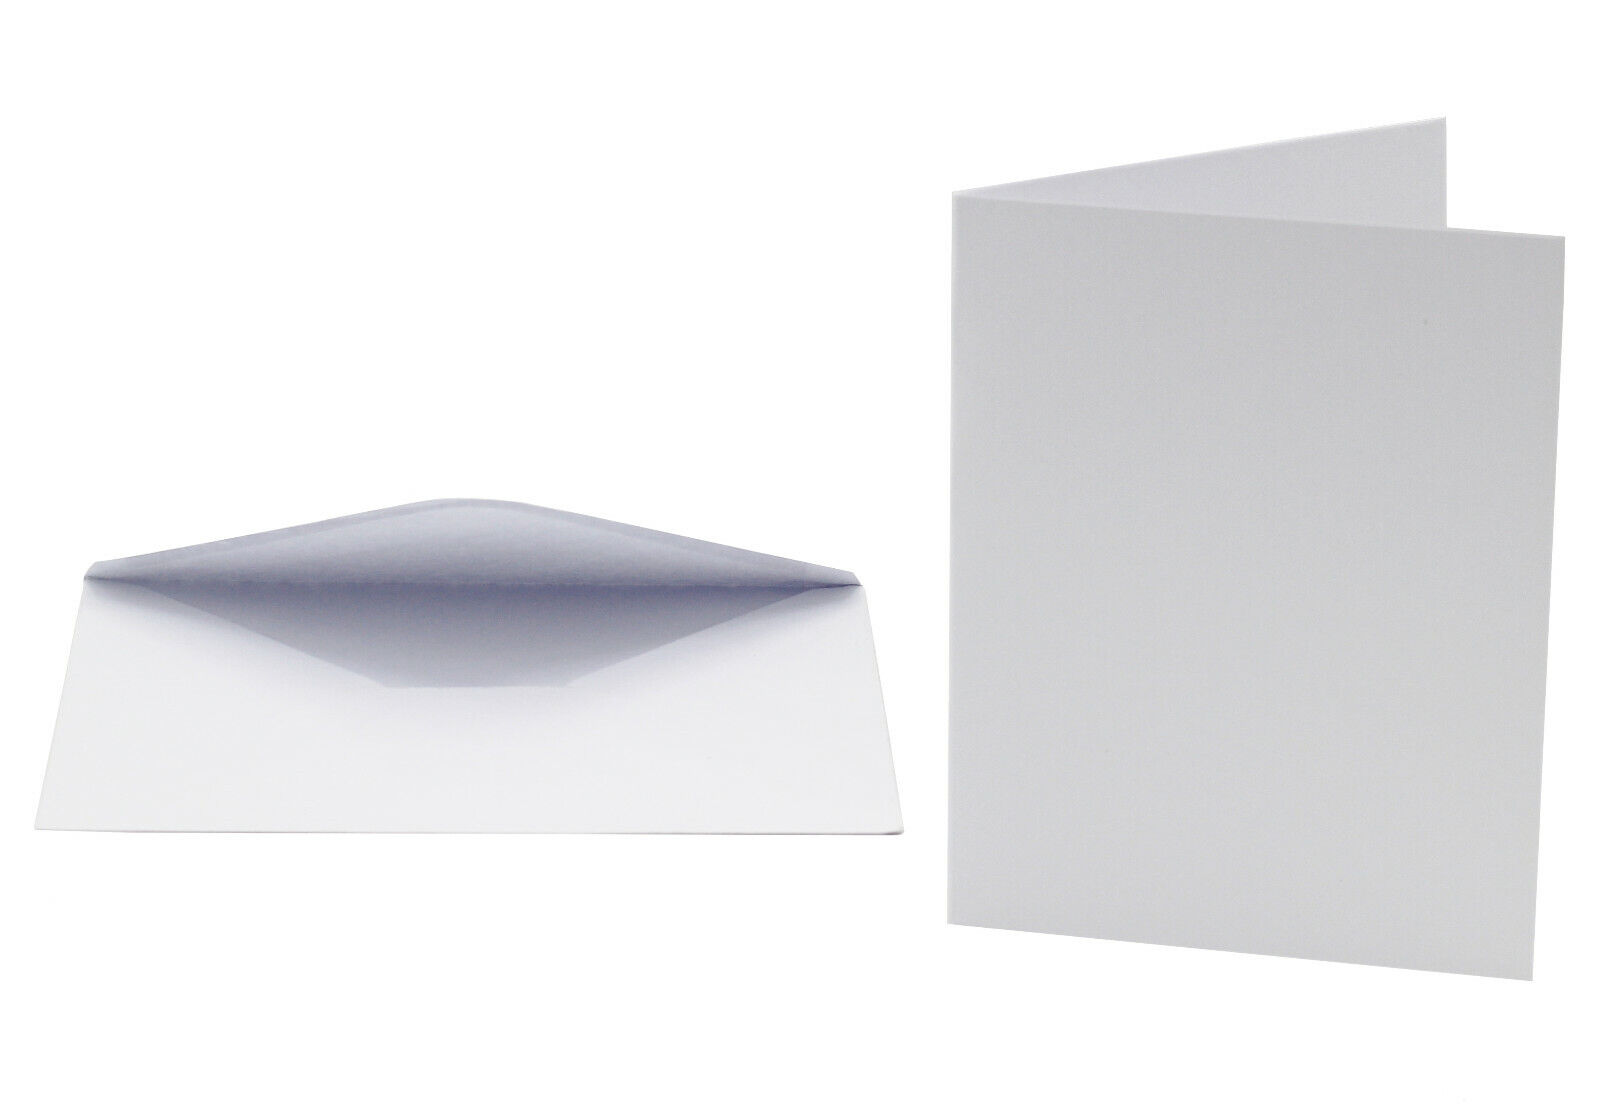 Max 62% OFF A2 Blank White Cards with Ho Directly managed store Invitations Envelopes Perfect for